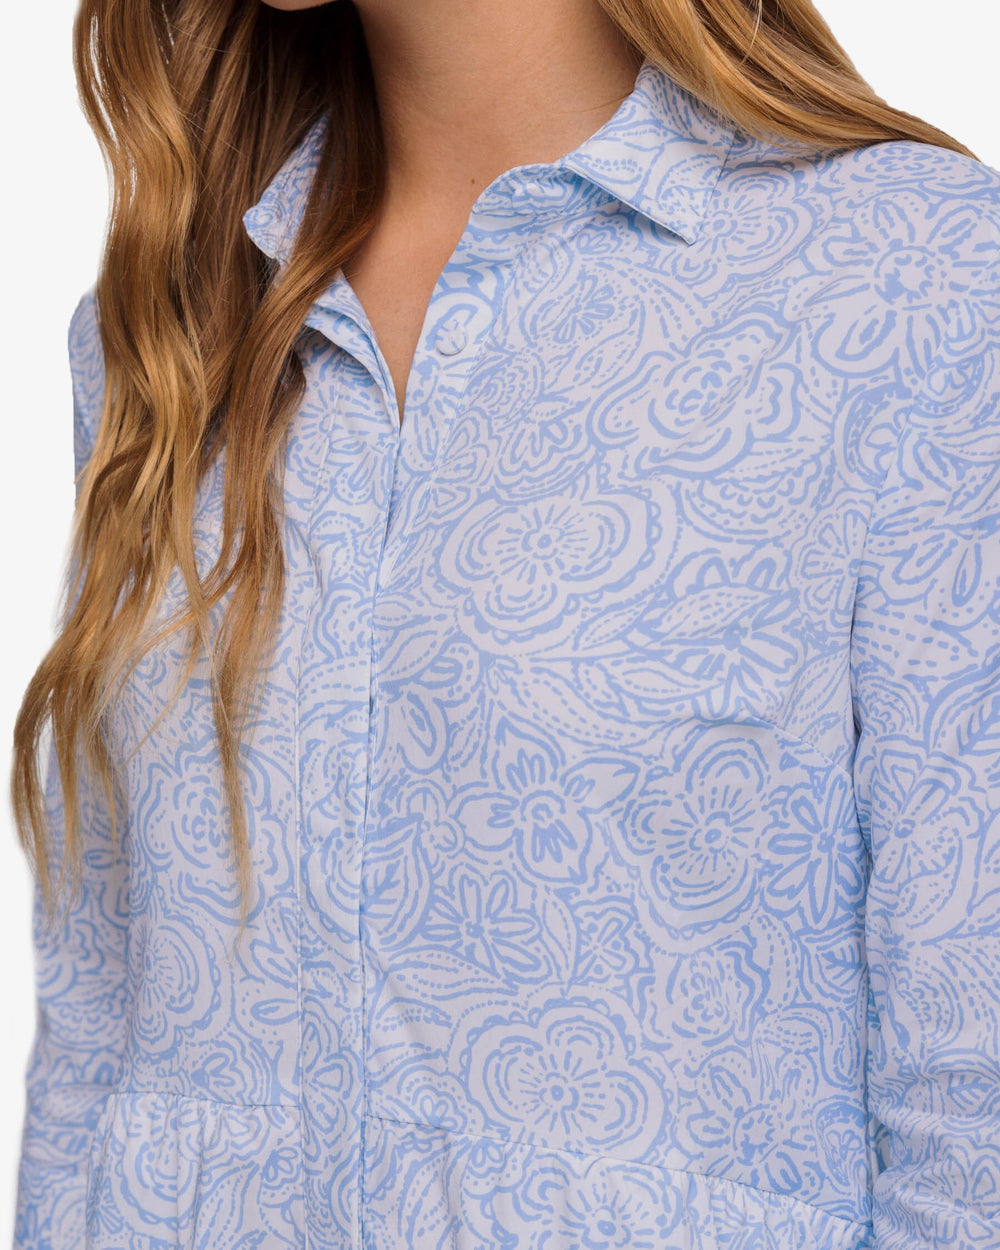 The detail view of the Southern Tide Cara Brrr Forever Floral Dress by Southern Tide - Sky Blue